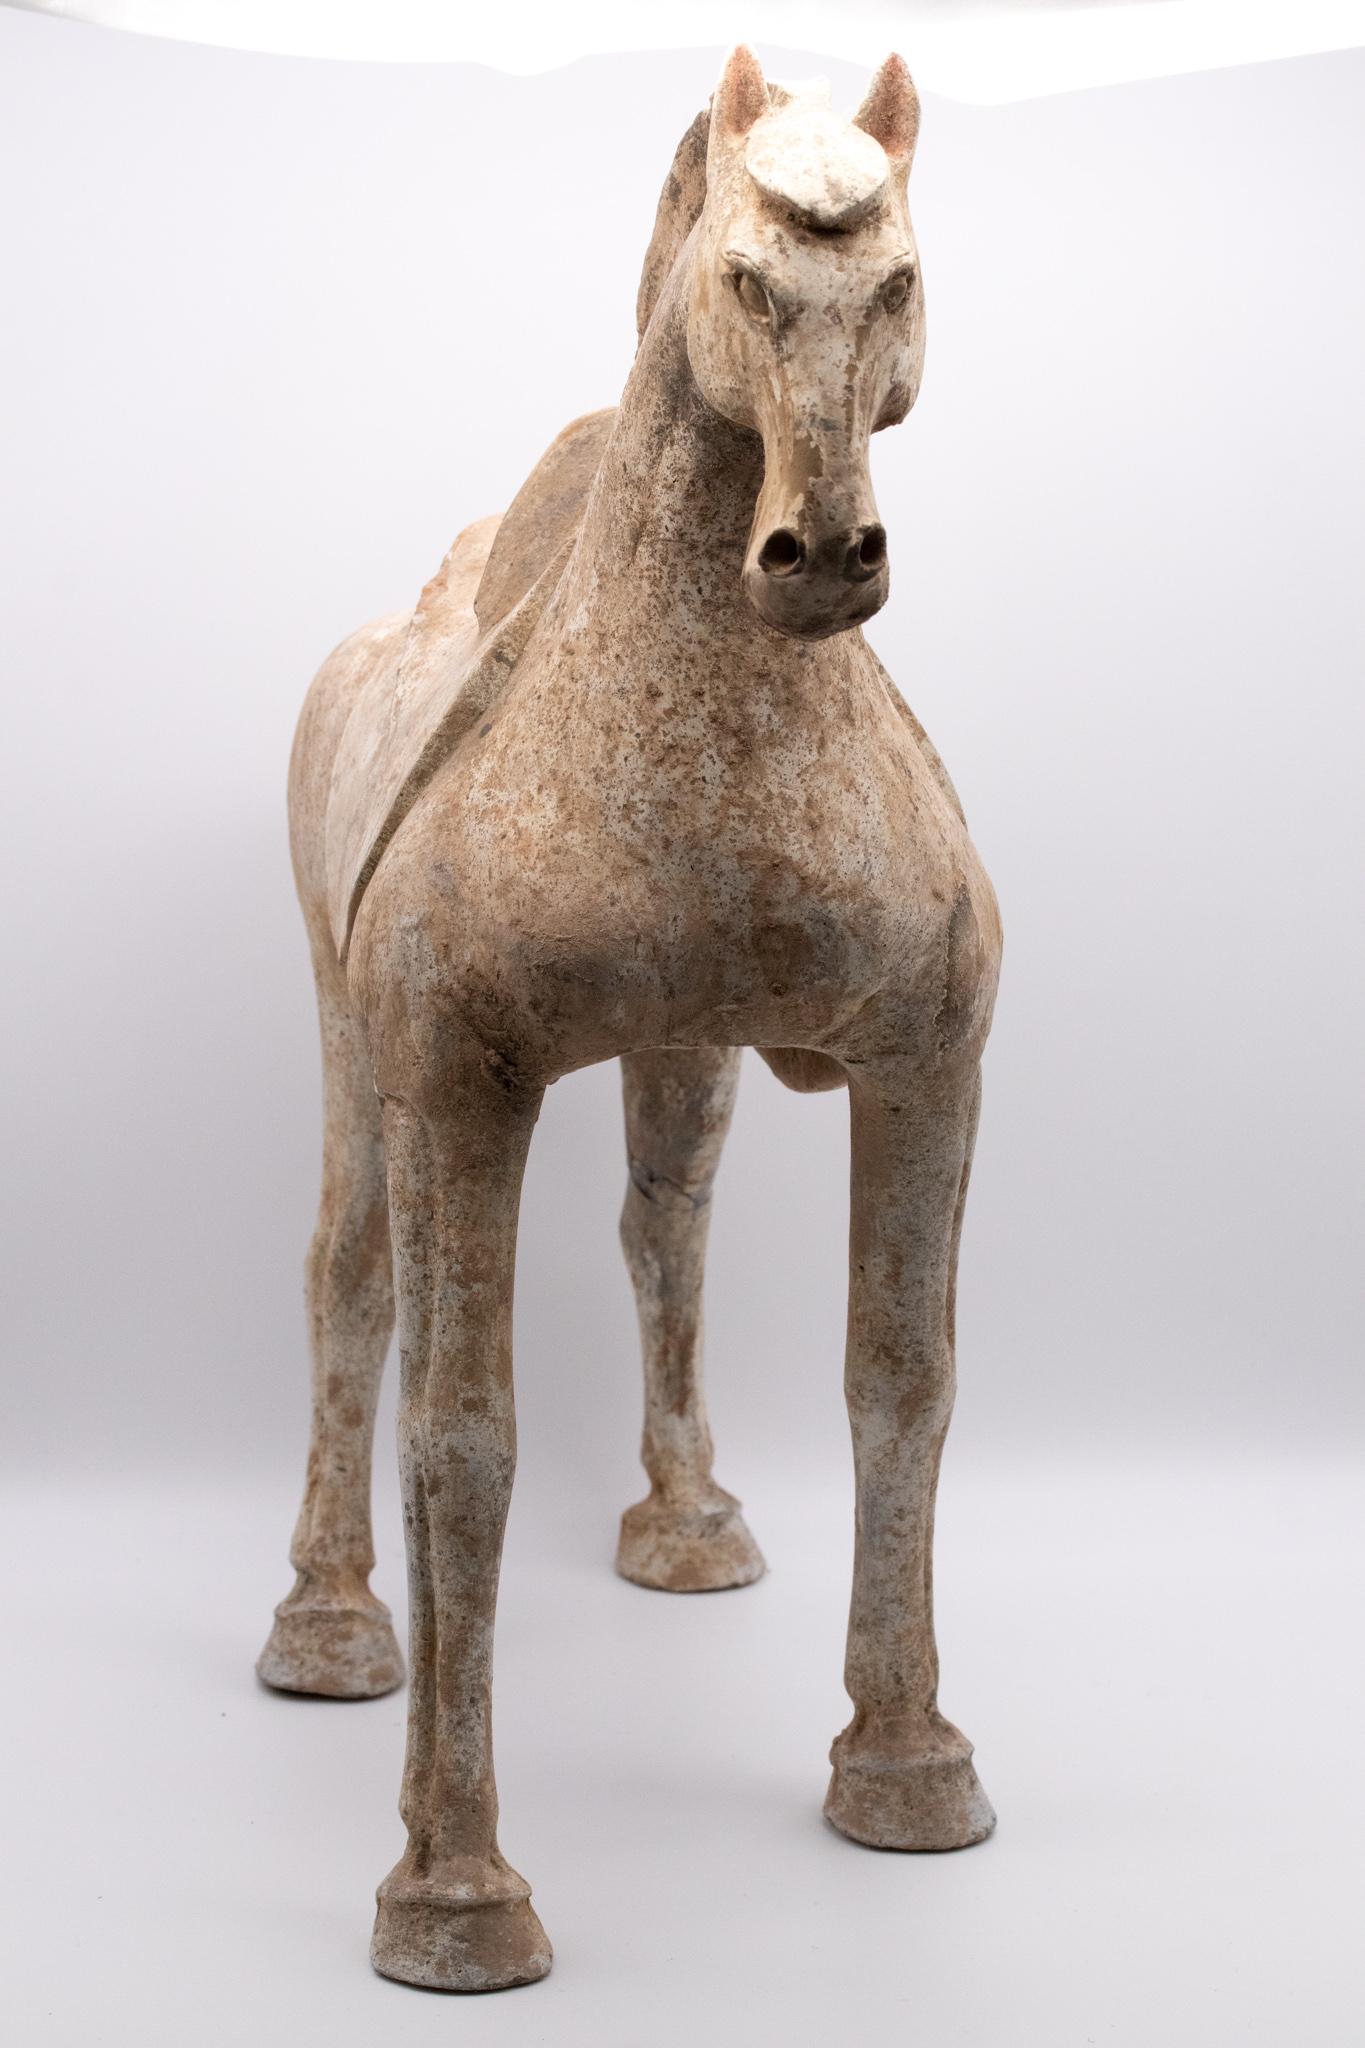 China 618-907 Ad Tang Dynasty Ancient Earthenware Sculpture of a Walking Horse In Excellent Condition For Sale In Miami, FL